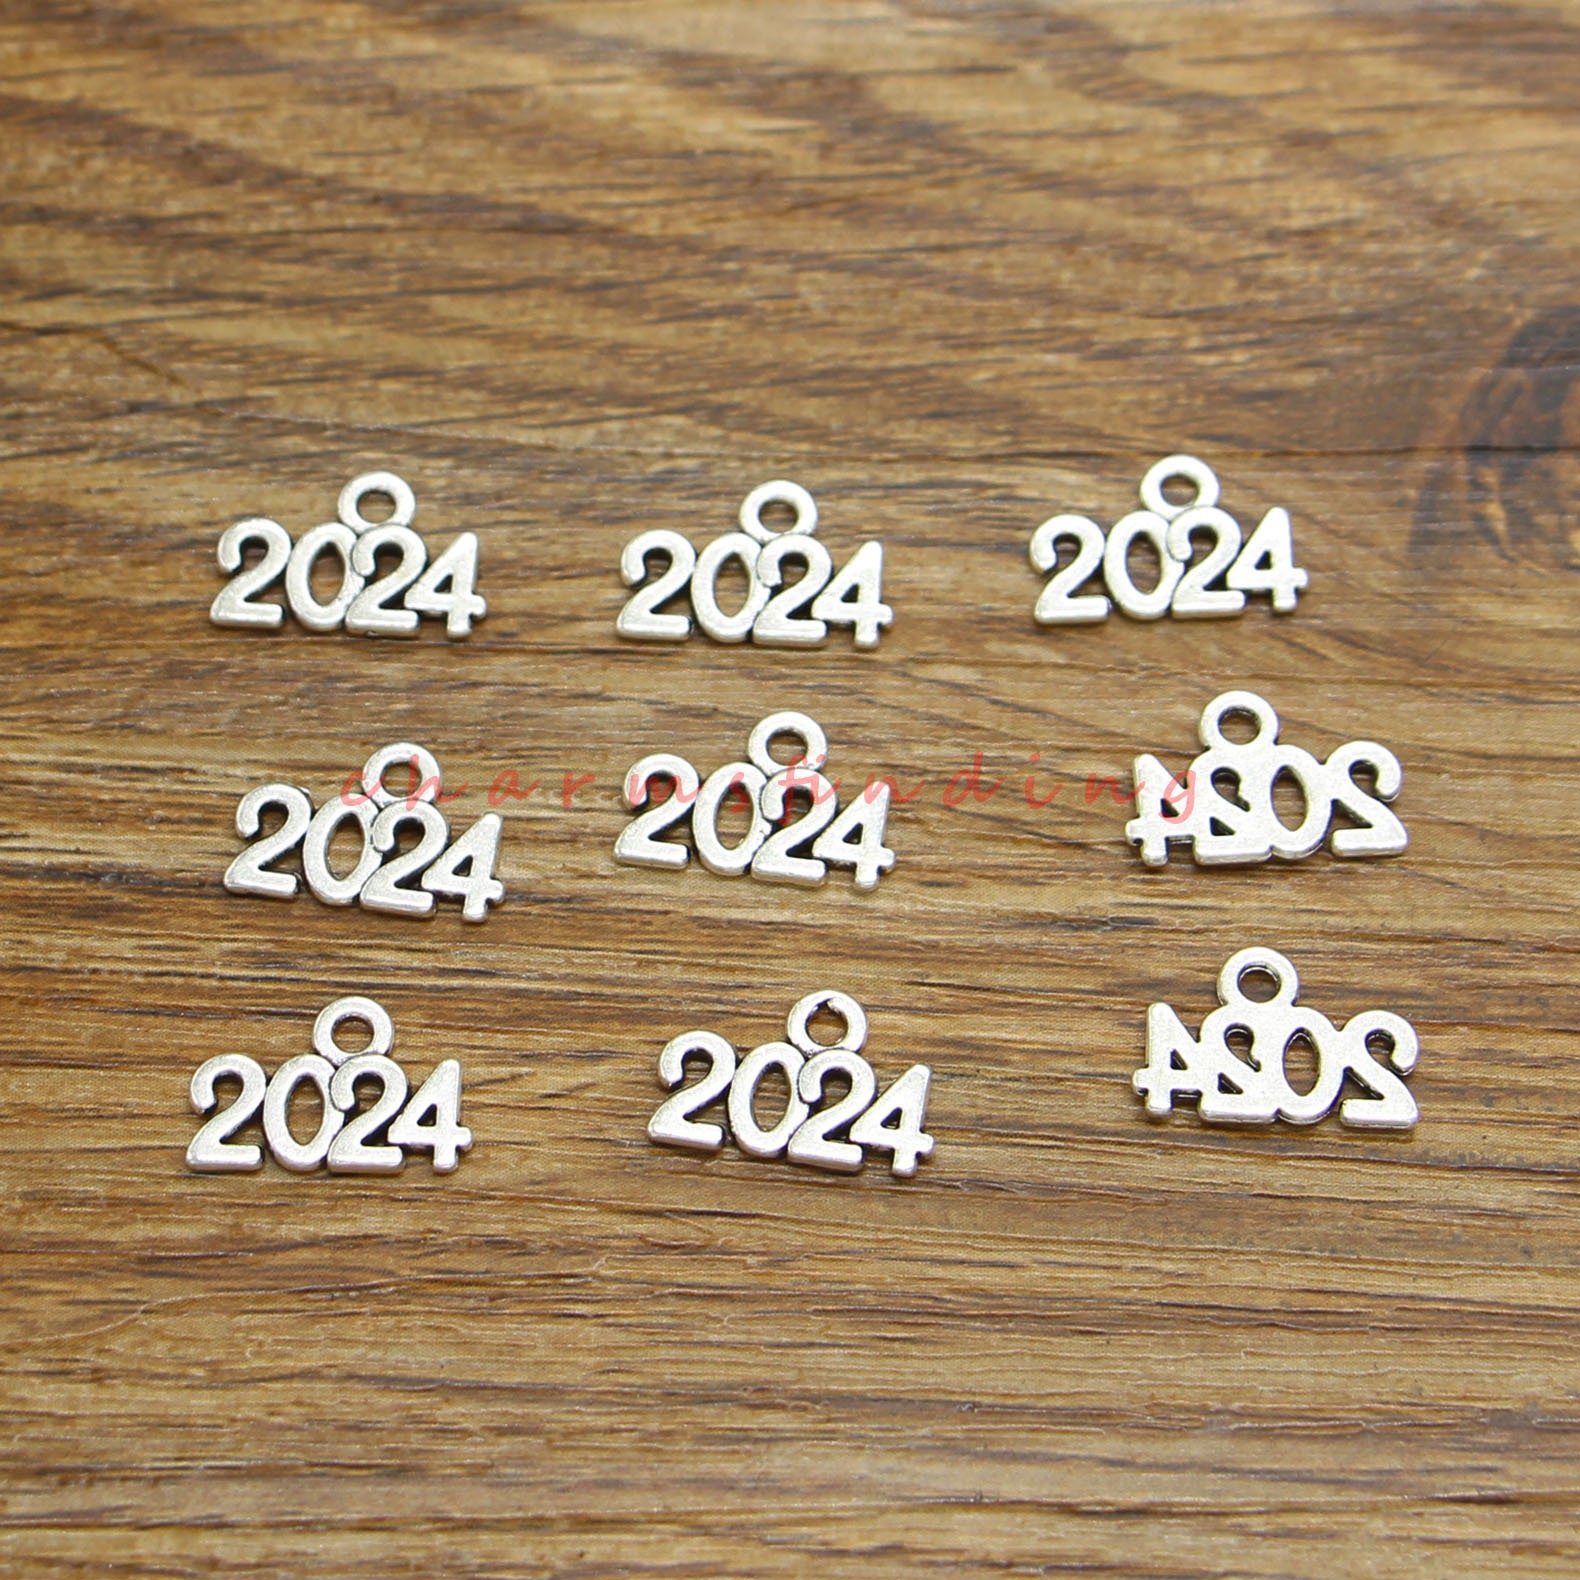 50/100 Bulk Year 2024 Charms Graduation Year Class the Year of 2024 Charms  Crafts Supplies Antique Silver Tone 9x14mm 